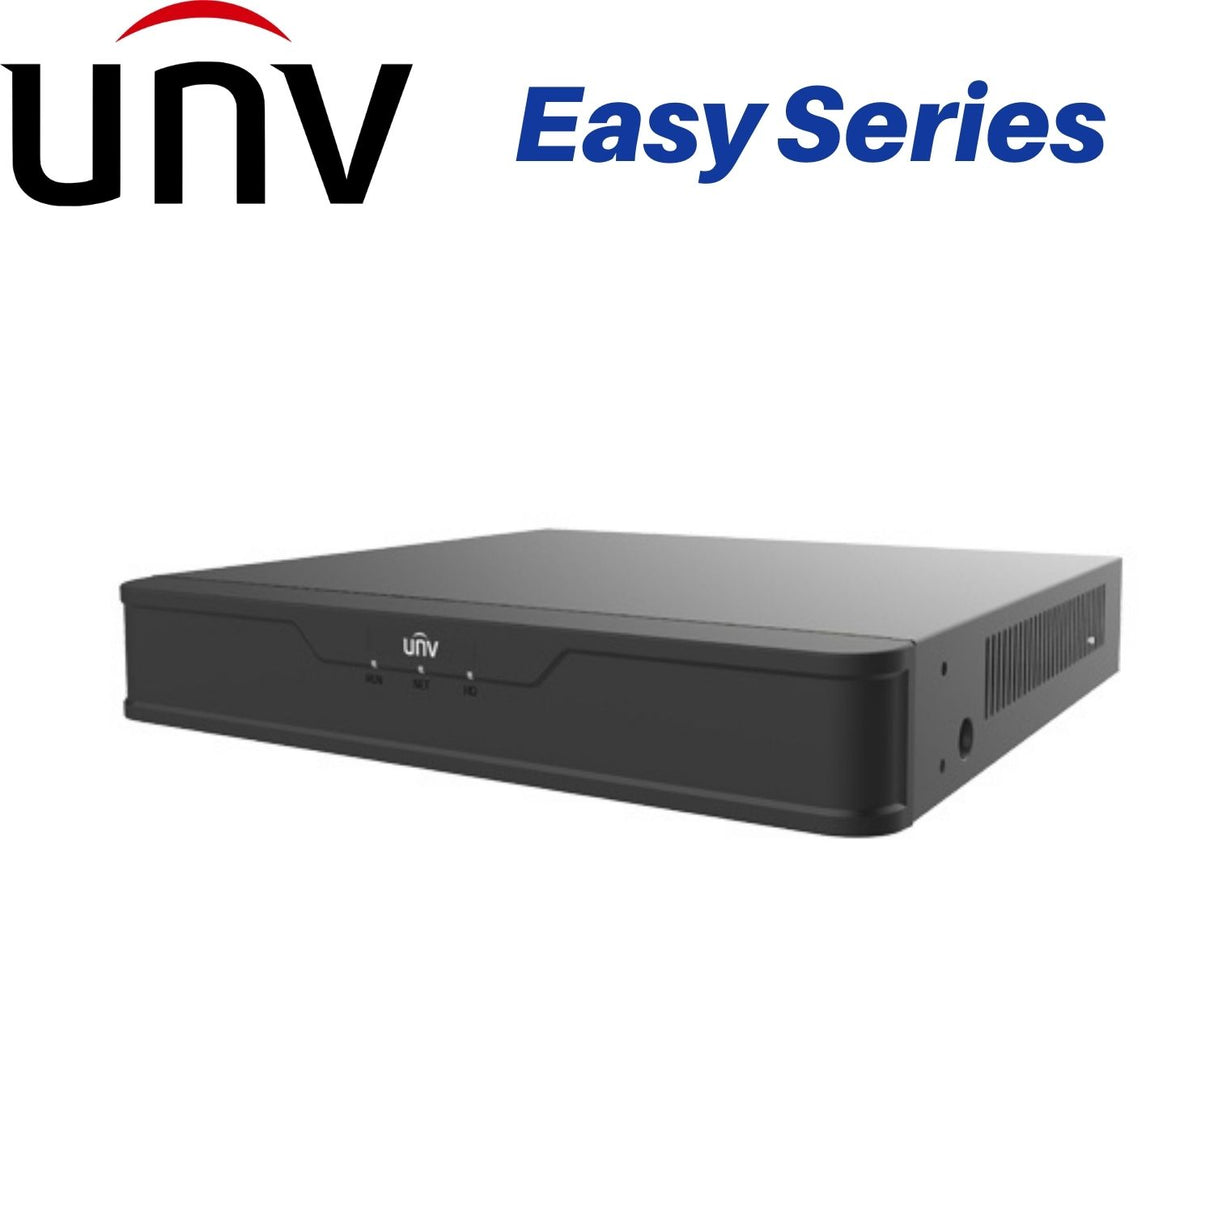 Univew Network Video Recorder: 8 Channel Easy Series, 8X PoE - NVR501-08B-P8